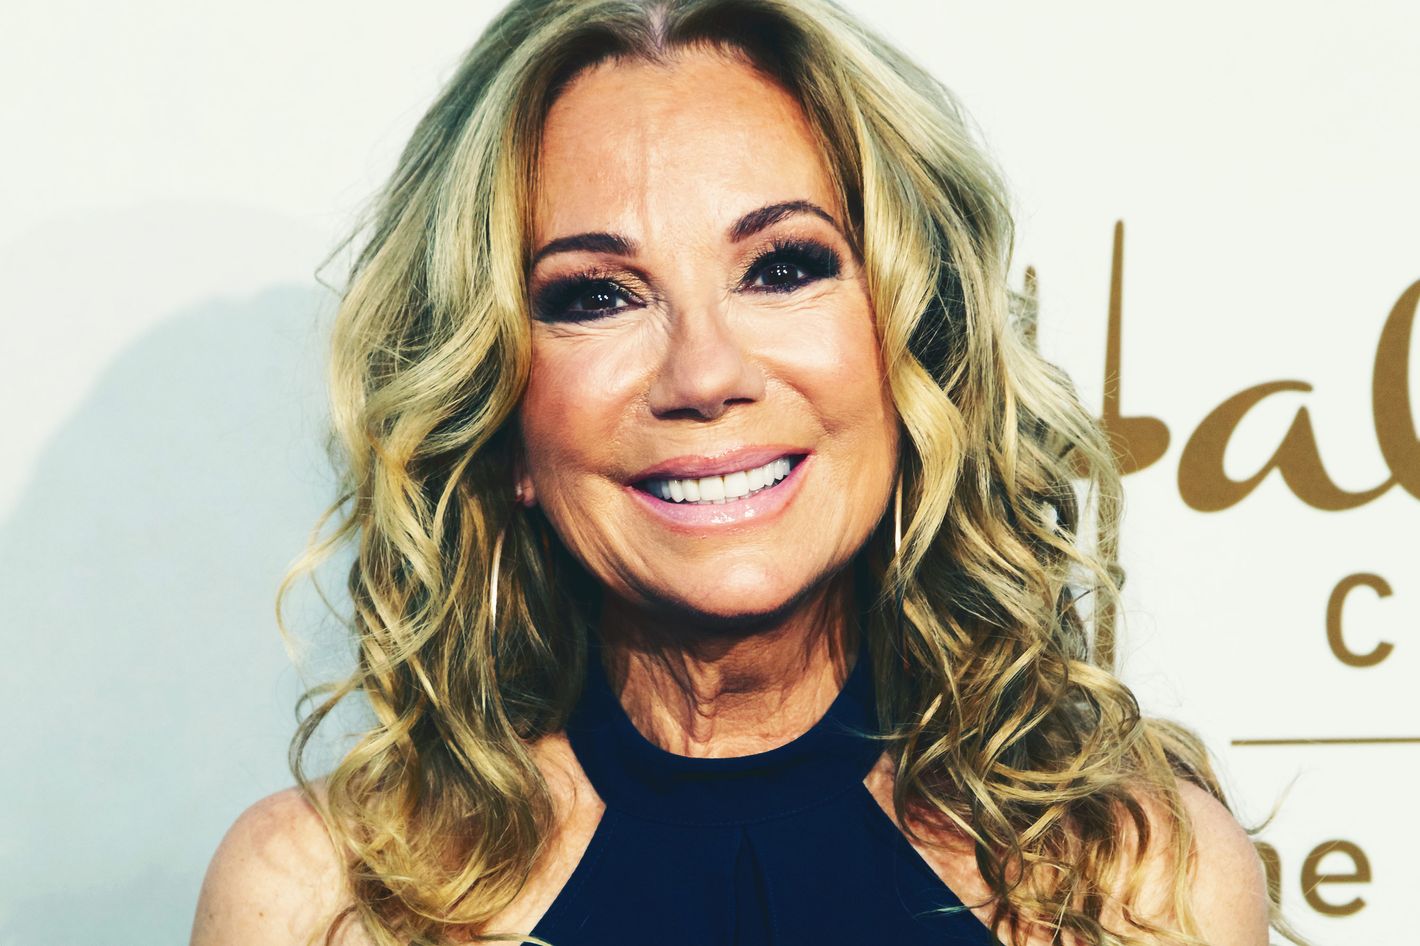 Attention Men: Kathie Lee Gifford Is Open to Dating Again